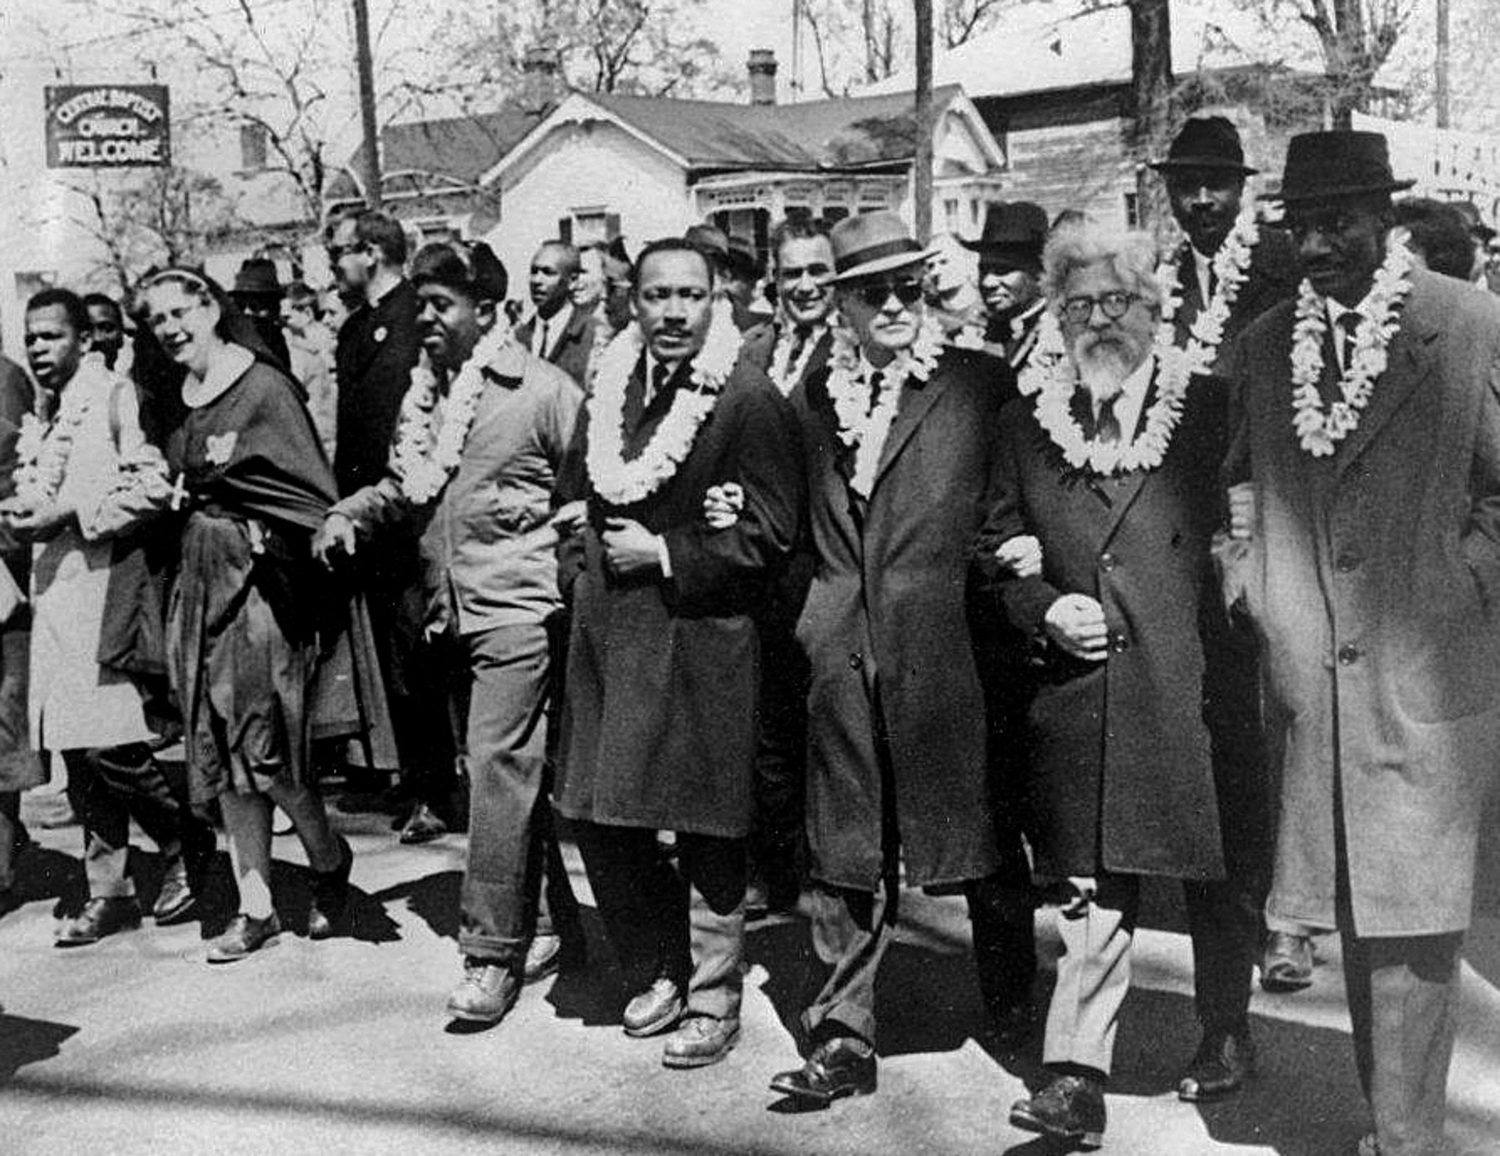 Dr. King marching with Dr. Ralph Bunche and Rabbi Abraham Joshua in a 1965 protest. Source: jewishcurrents.org